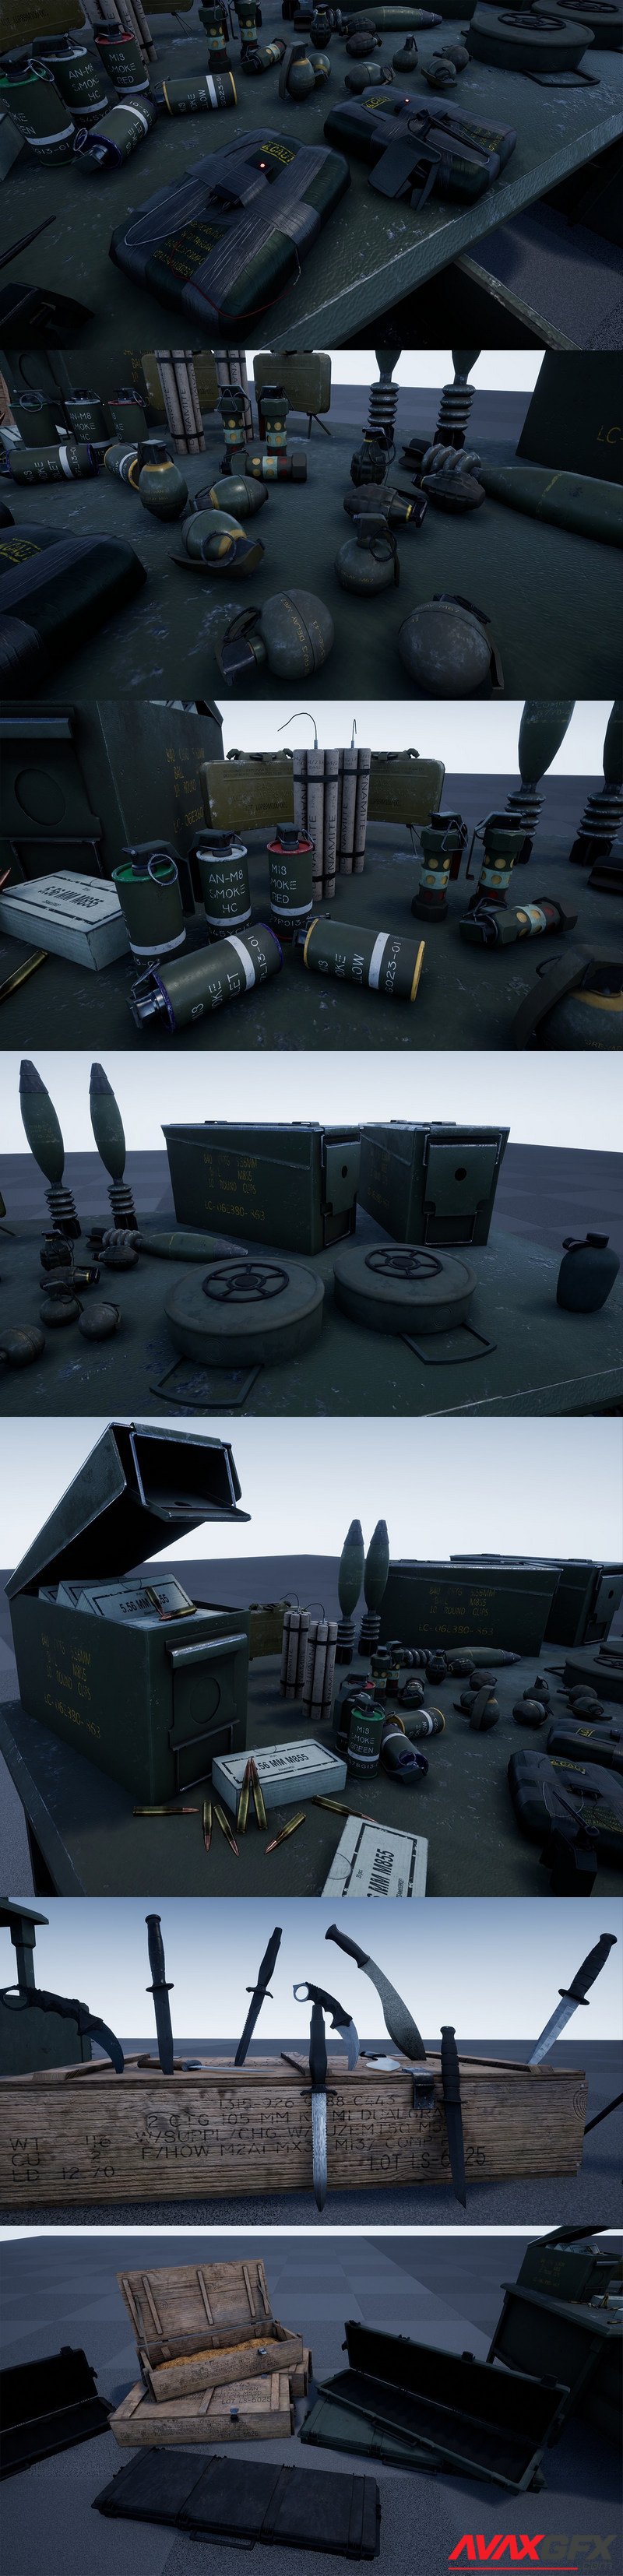 Knives, Explosives, and Ammunition - Military Props Pack